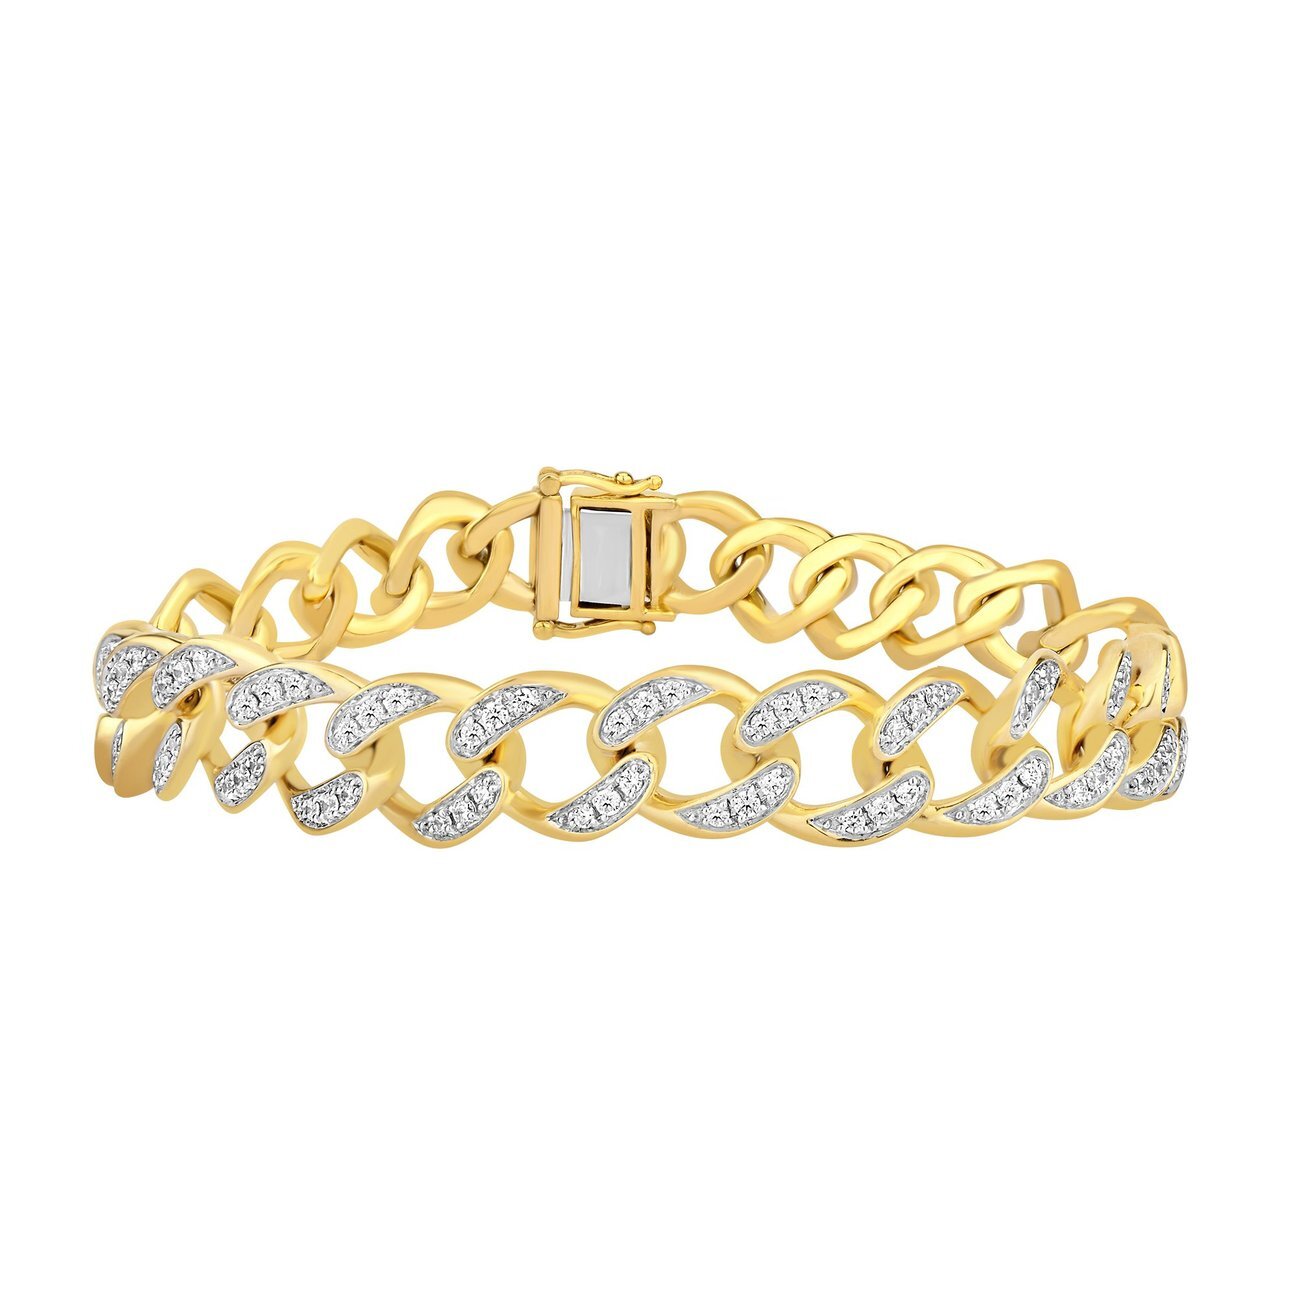 Bracelets — The Gold Source Jewelry Store